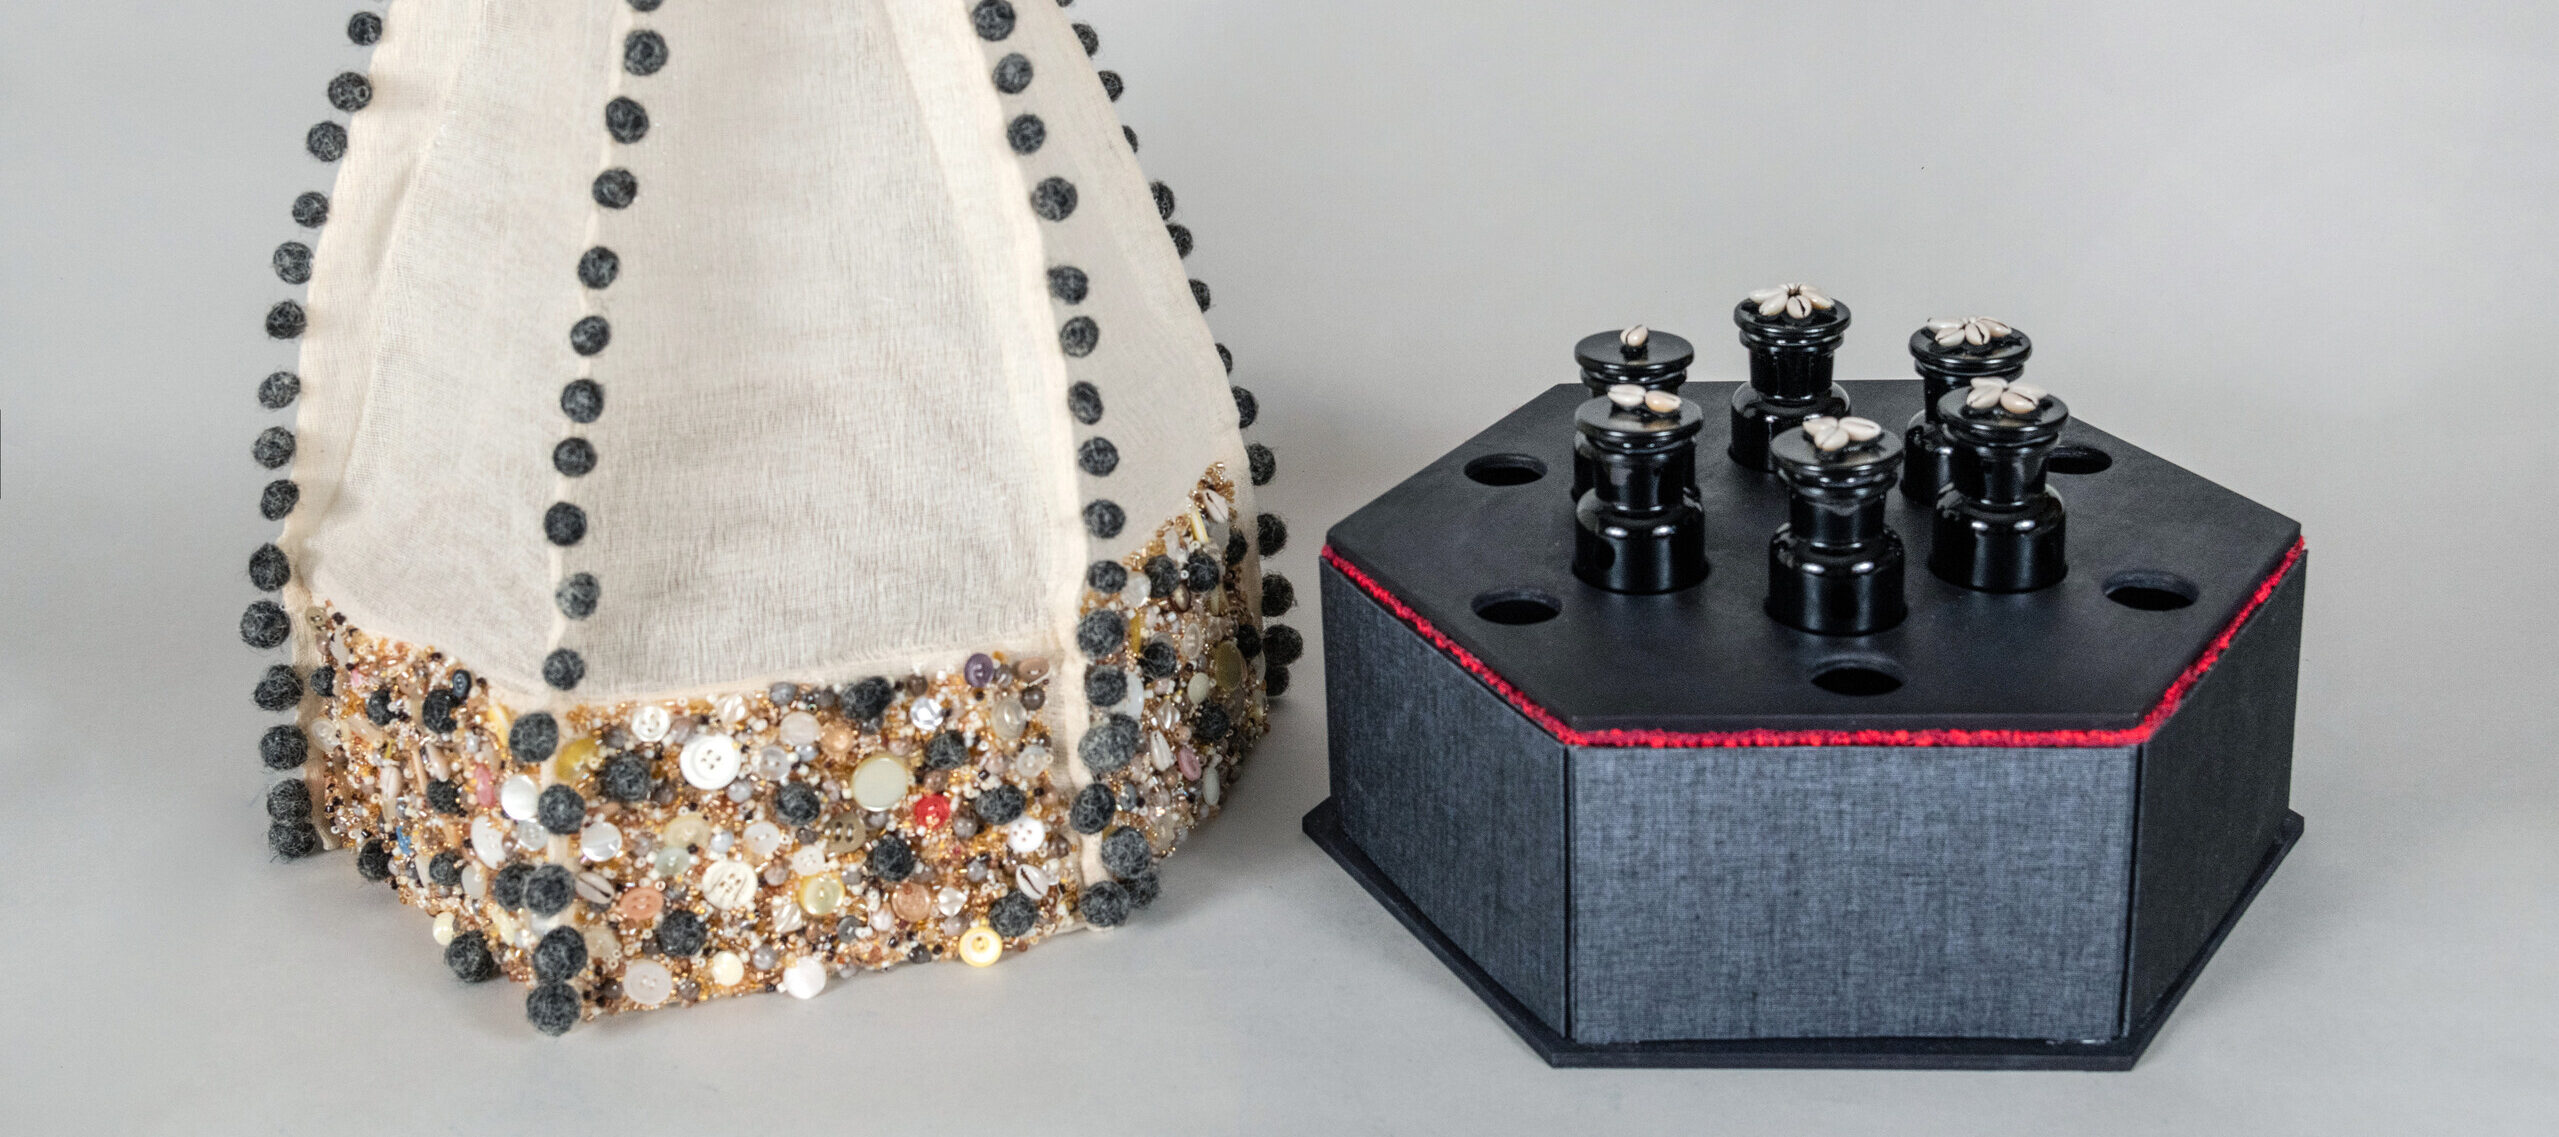 Two parts of an artist's book. One part is a black hexagonal box covered in cowry shells, small black bottles, and red beads. The other part is made of white fabric and covered in balls of human hair, buttons, and beads.